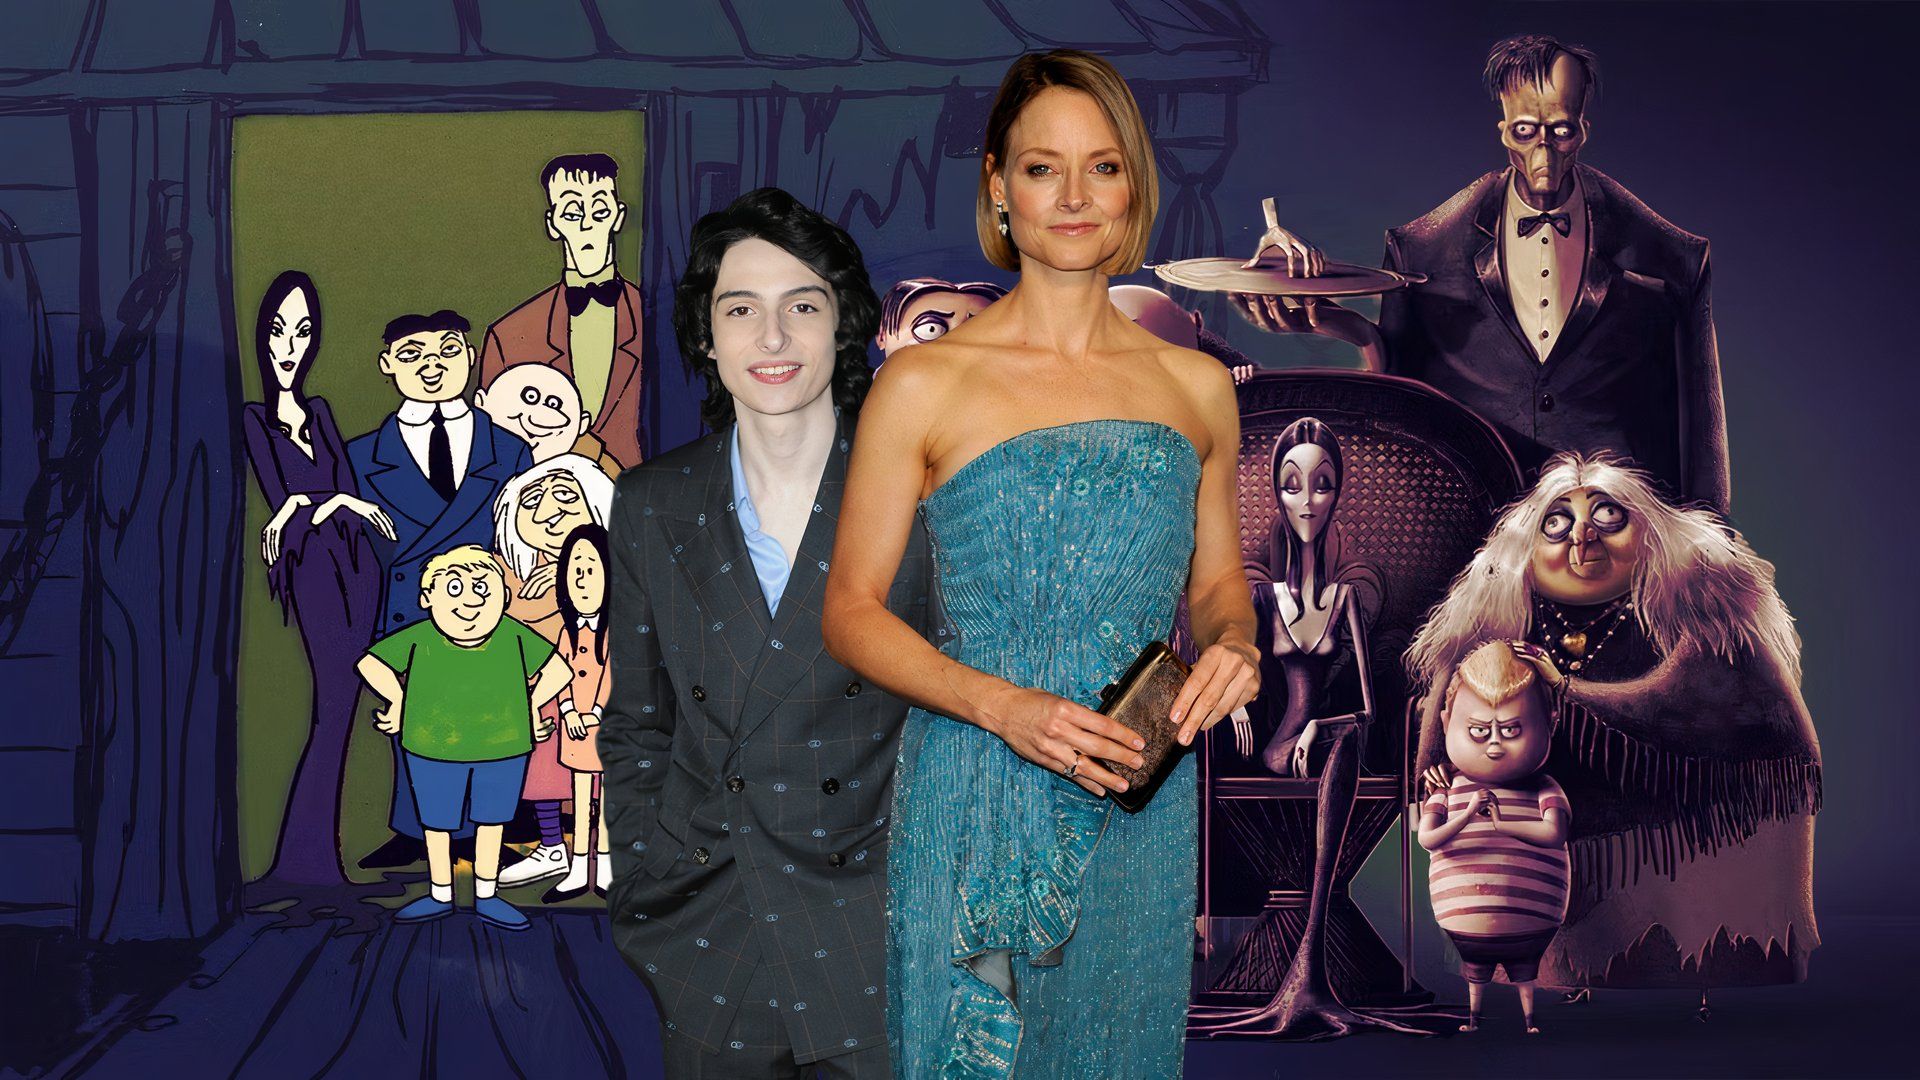 Finn Wolfhard and Jodie Foster Both Voiced Pugsley Addams Decades Apart